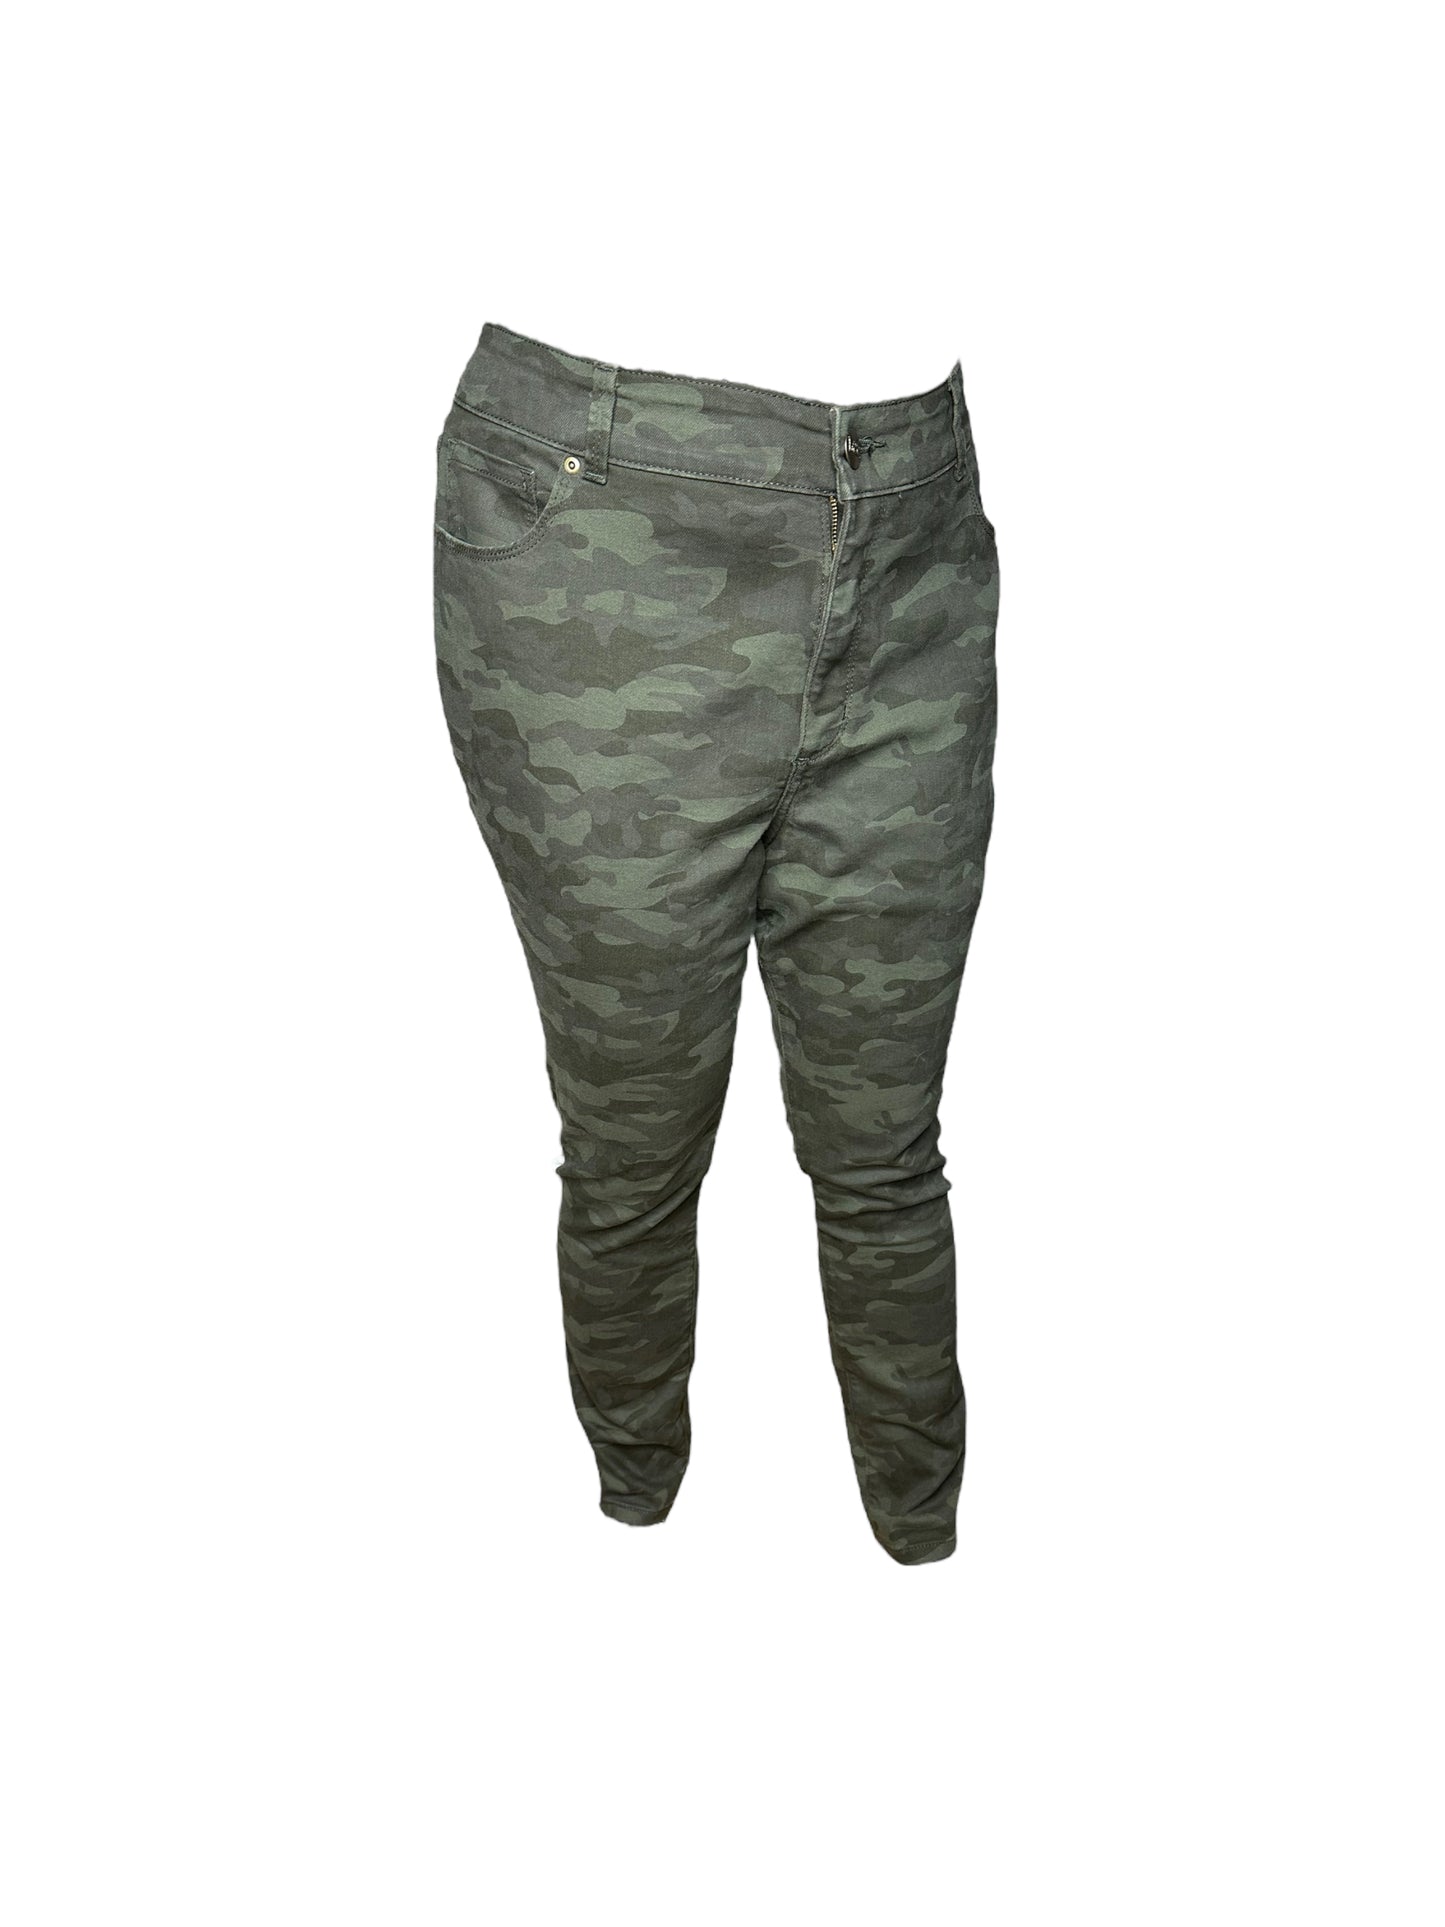 Green Army Patterned Jeans